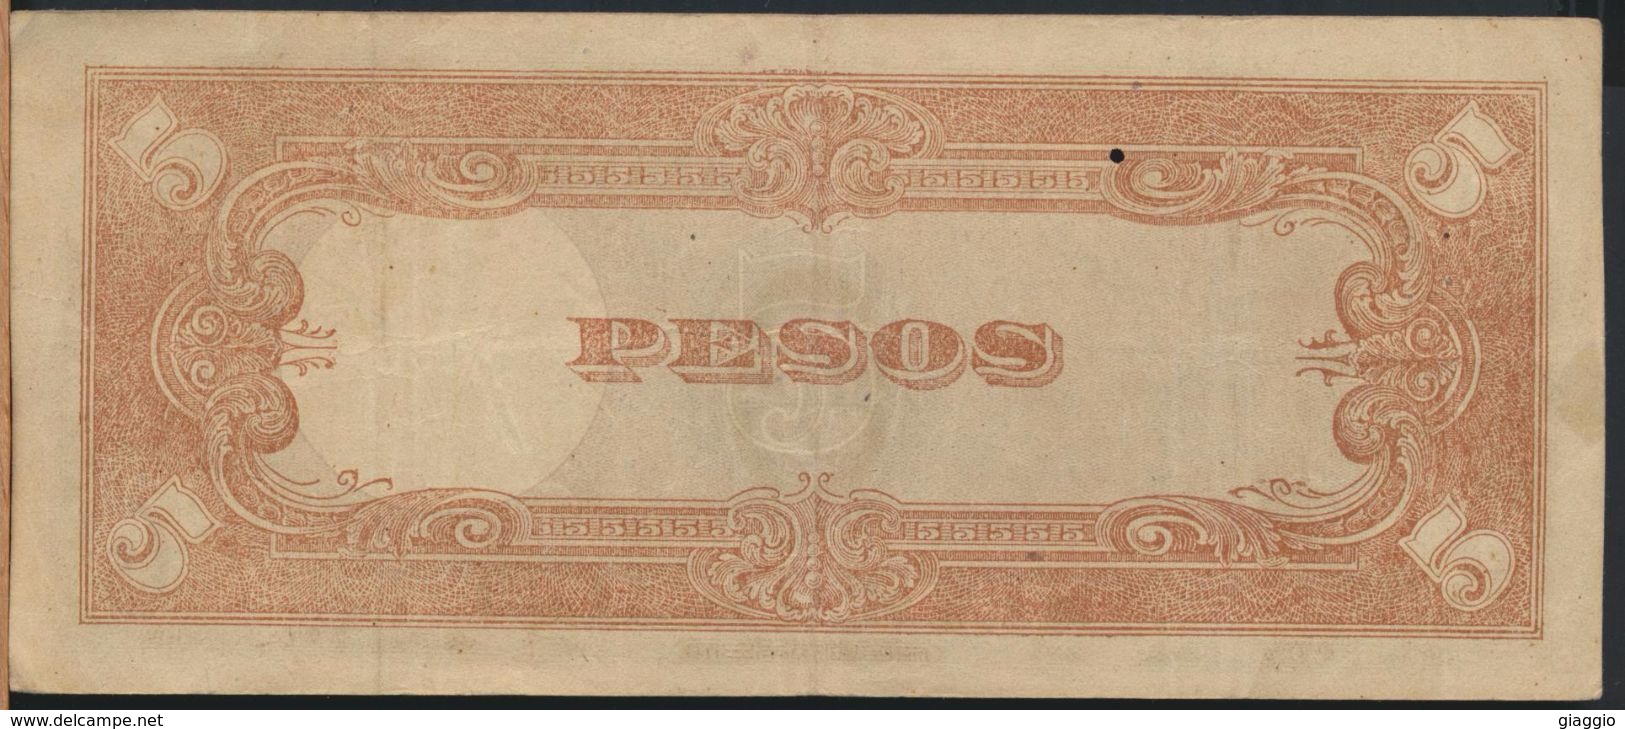 °°° JAPANESE GOVERNMENT 5 PESOS 1943 °°° - Giappone